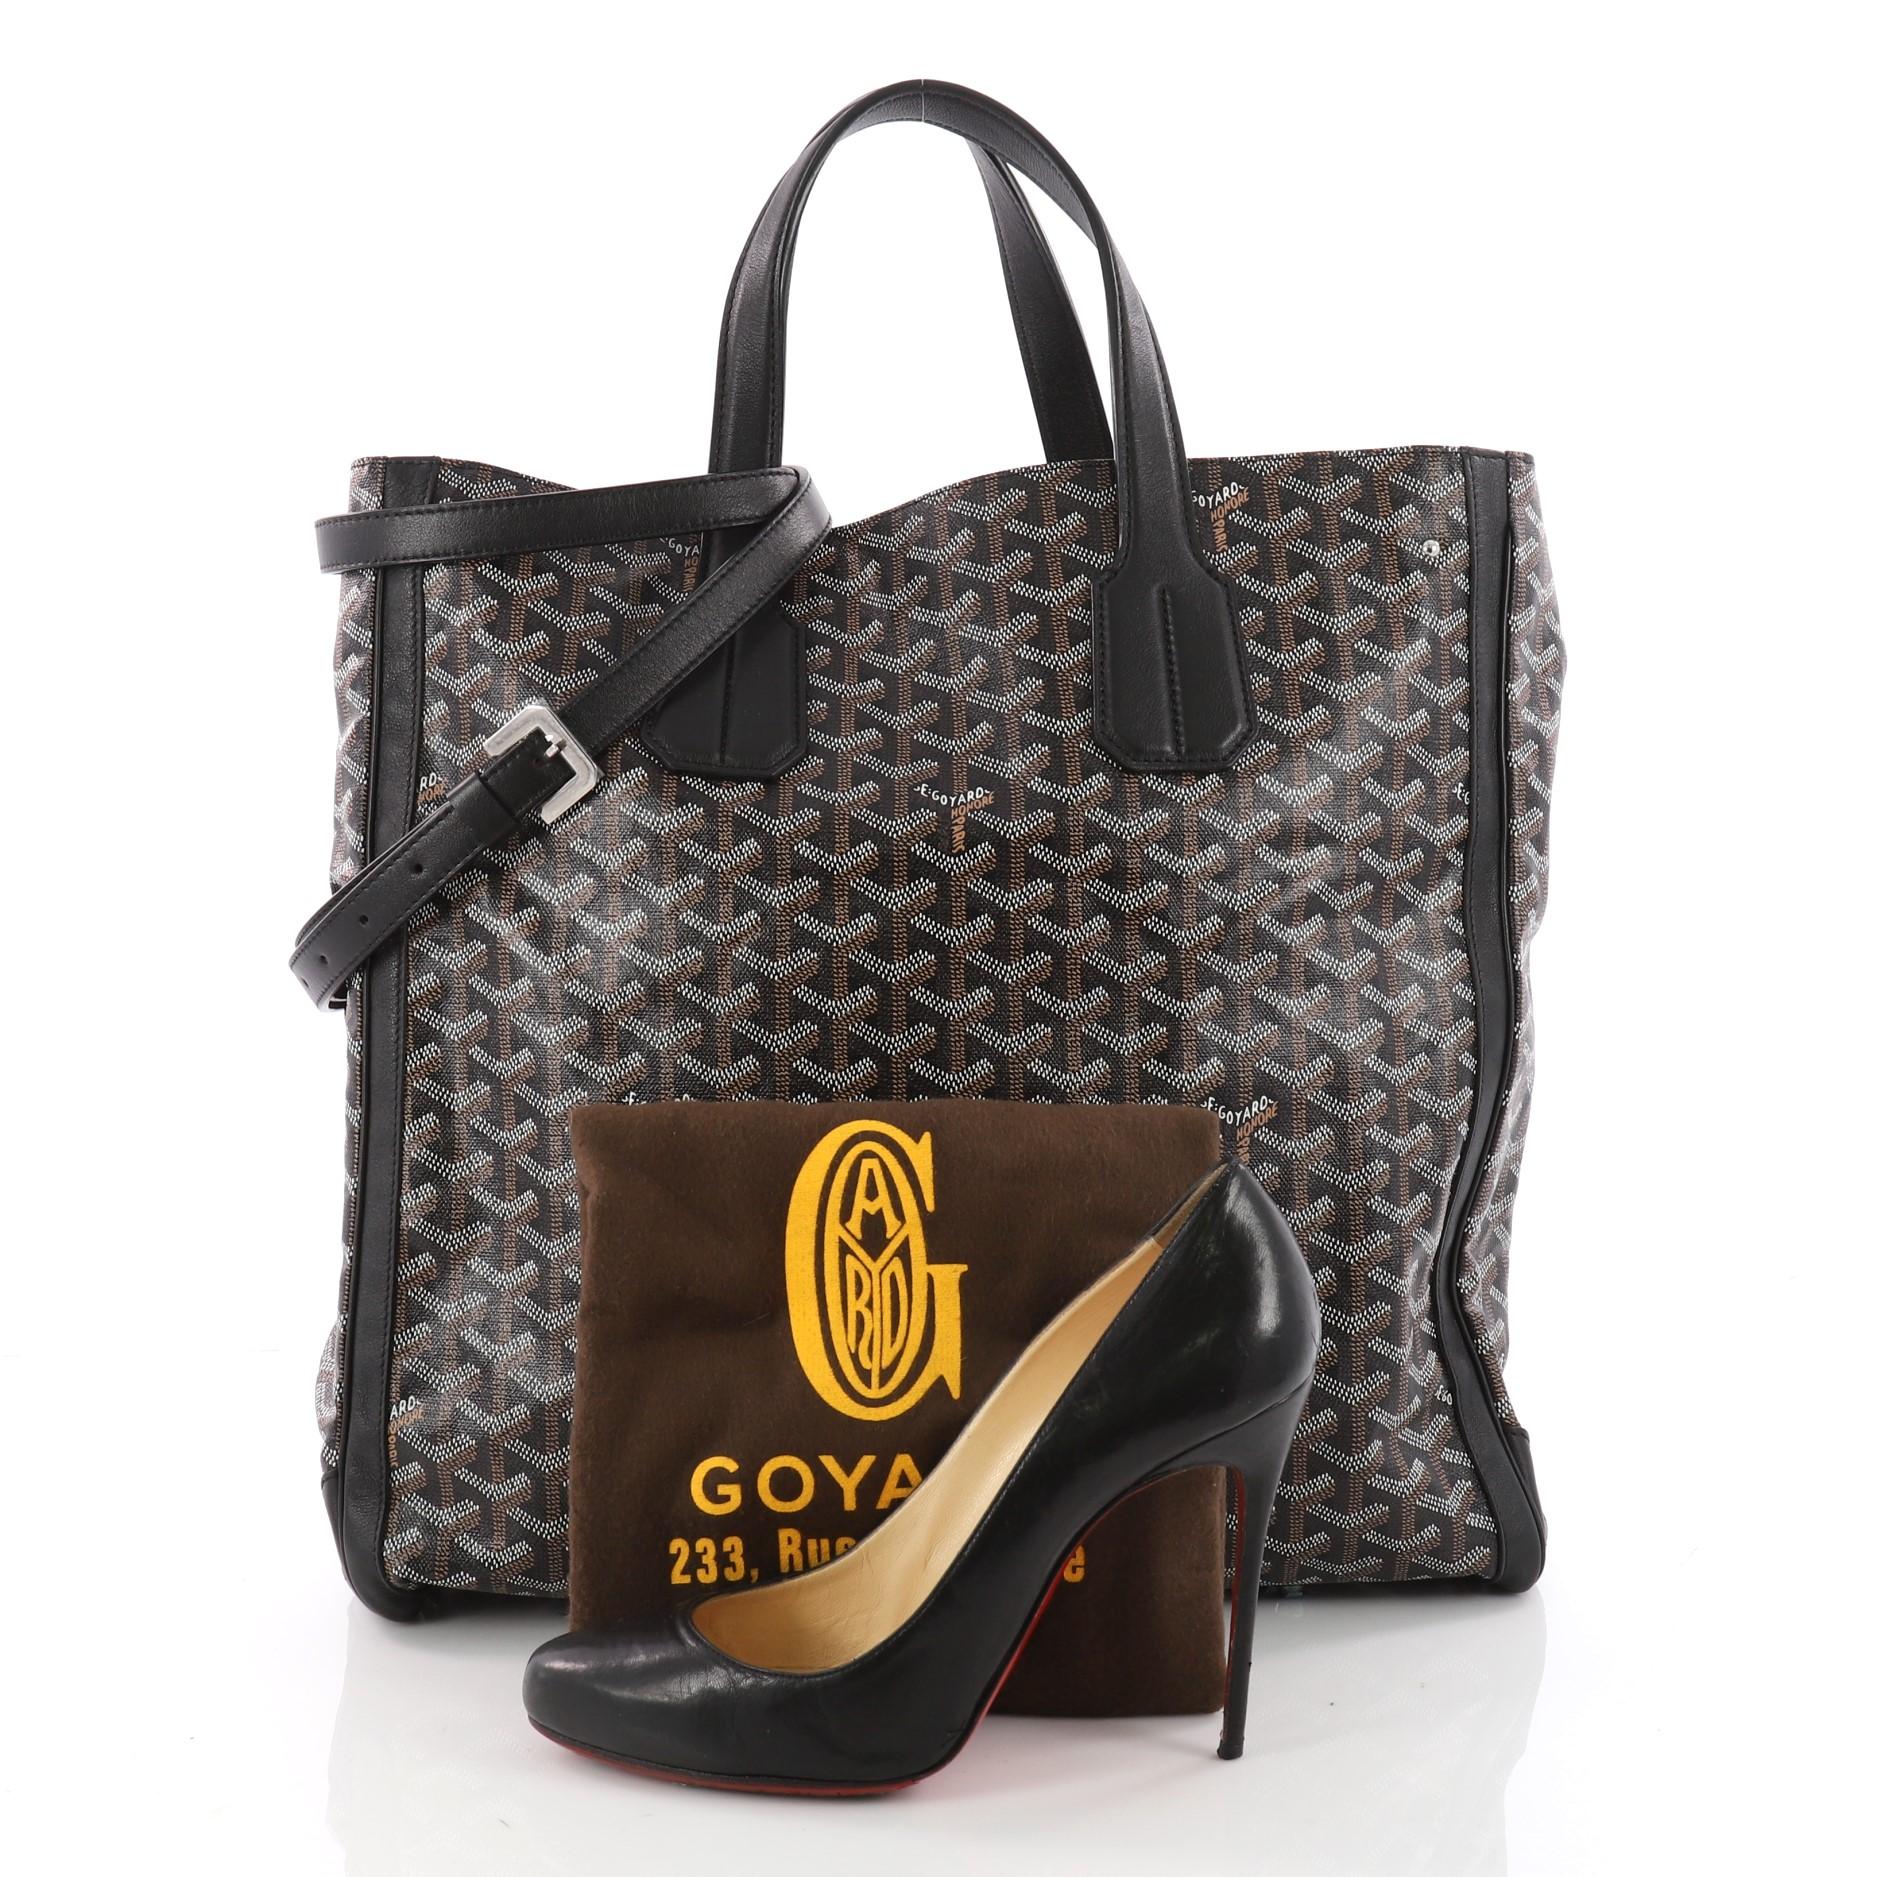 This authentic Goyard Voltaire Convertible Tote Coated Canvas displays a luxurious and casual sophistication perfect for the style-conscious man or woman. Crafted from classic black chevron coated canvas, this tote features dual-flat handles, long